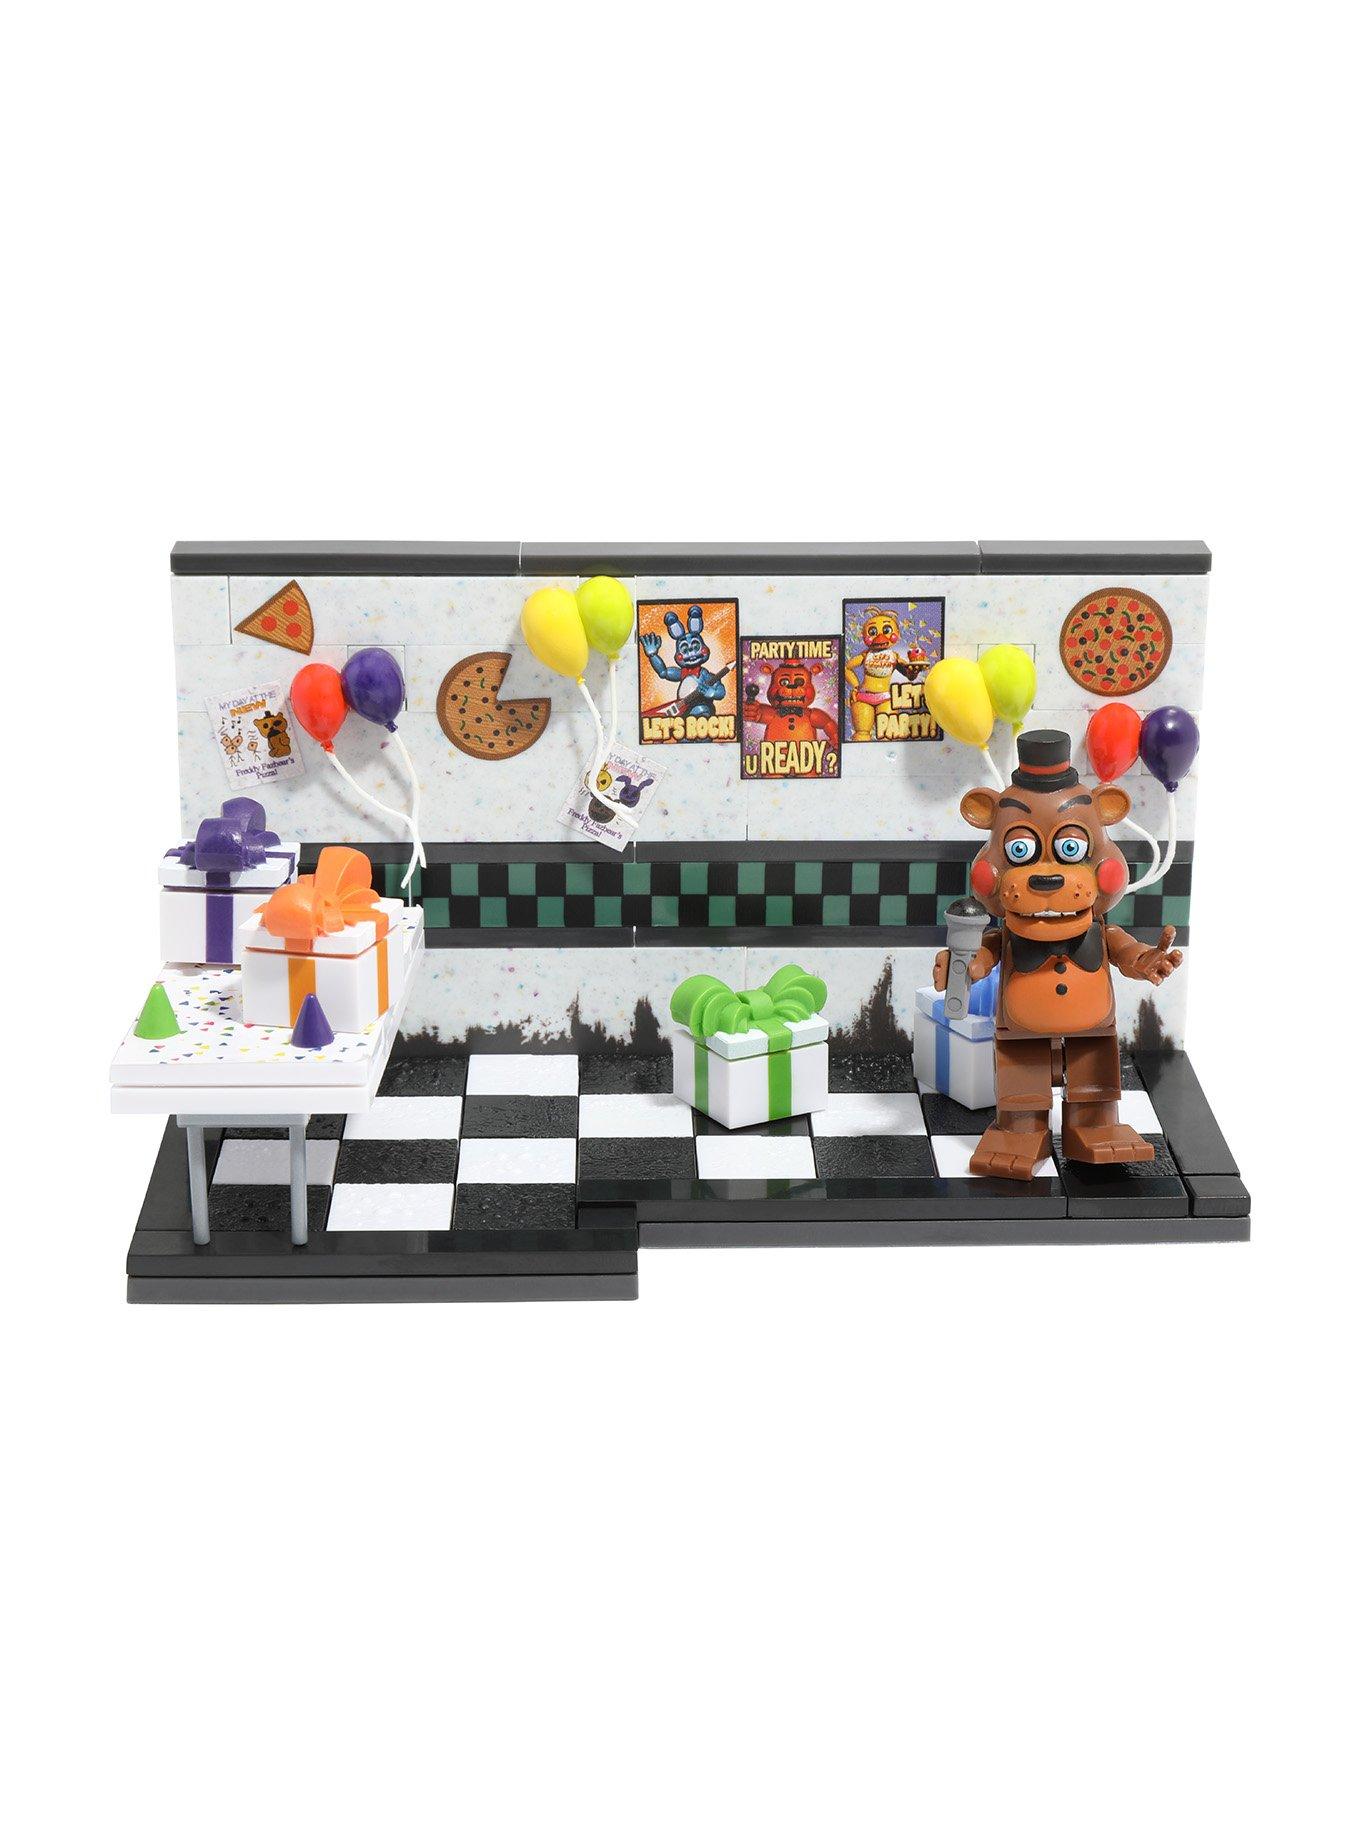 Five Nights At Freddy's Party Room Construction Building Kit